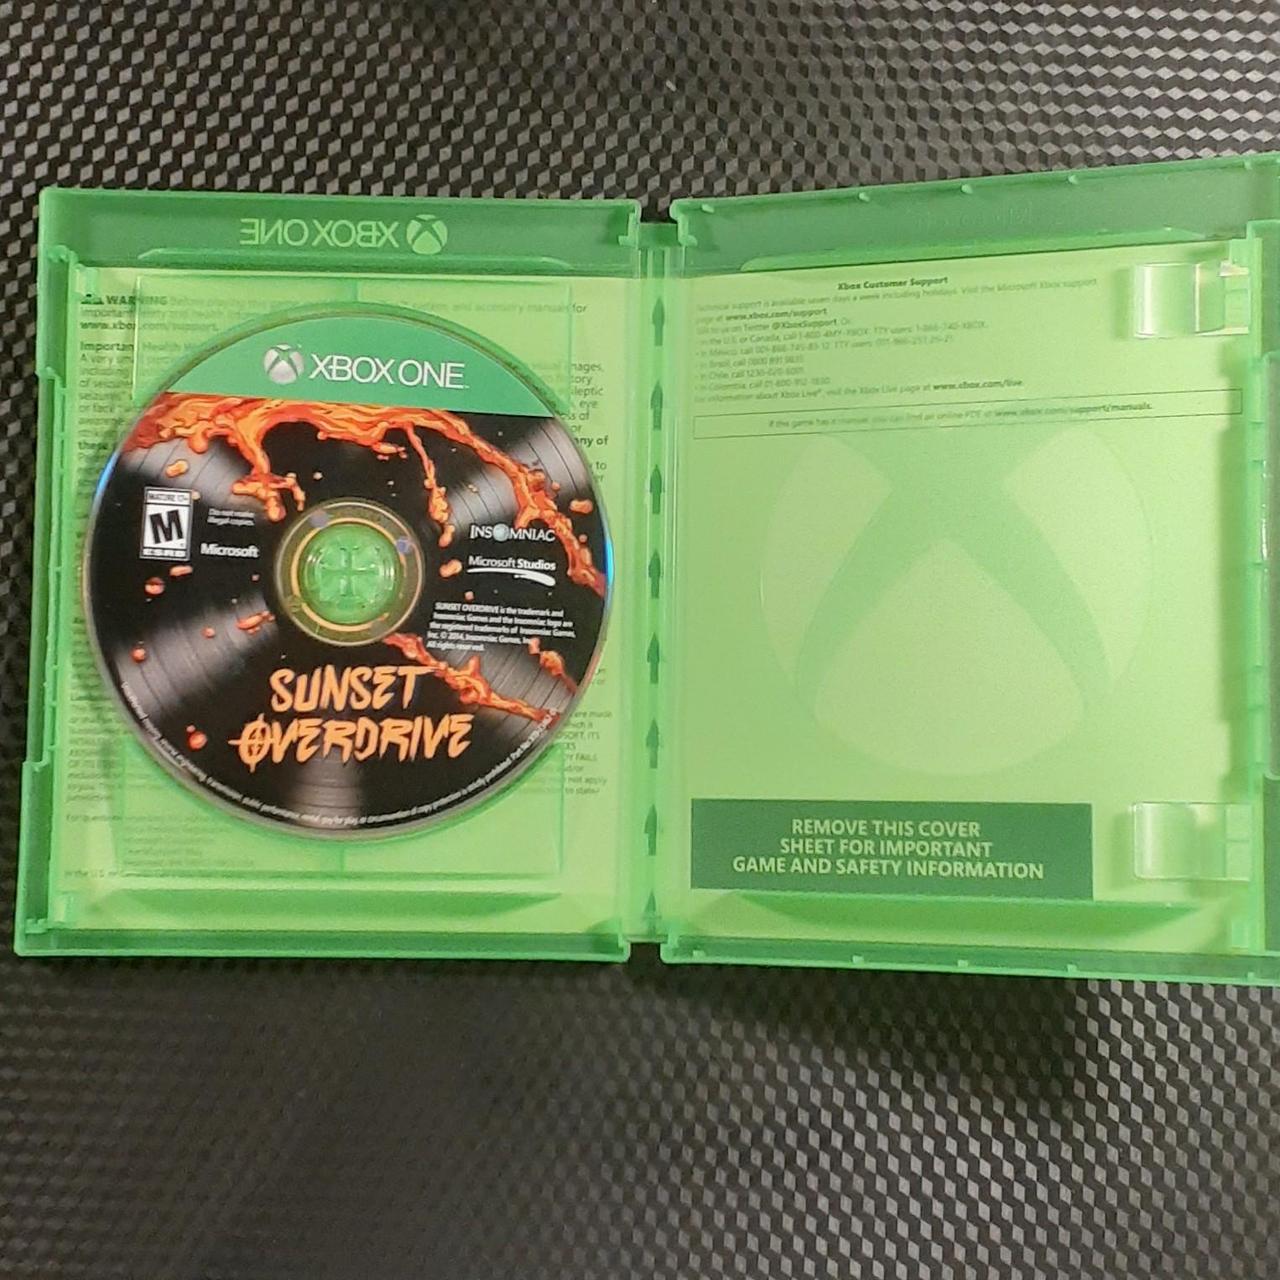 Sunset overdrive on Xbox 1, perfect condition - Depop